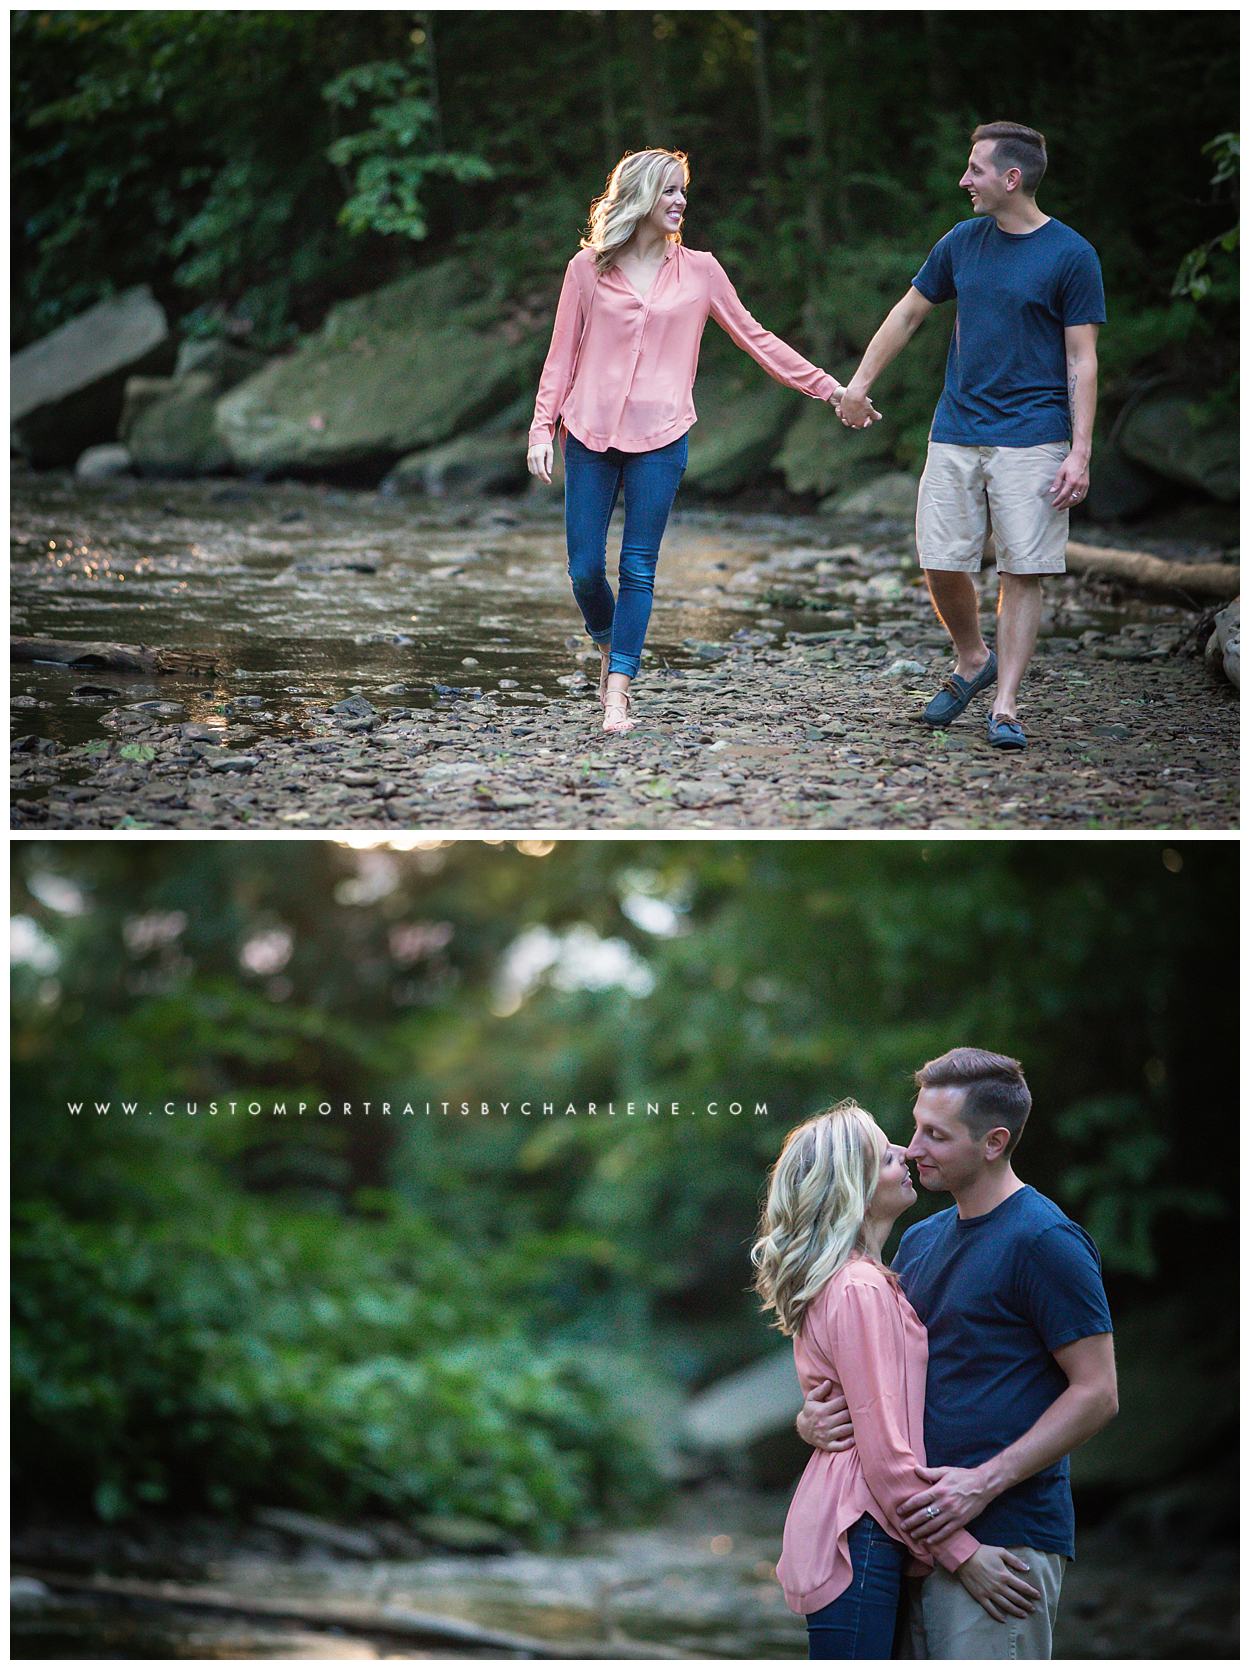 Sewickley Engagement Session - Engagement Picture Ideas - Pittsburgh Wedding Photography - Urban Rural Park Engaged15